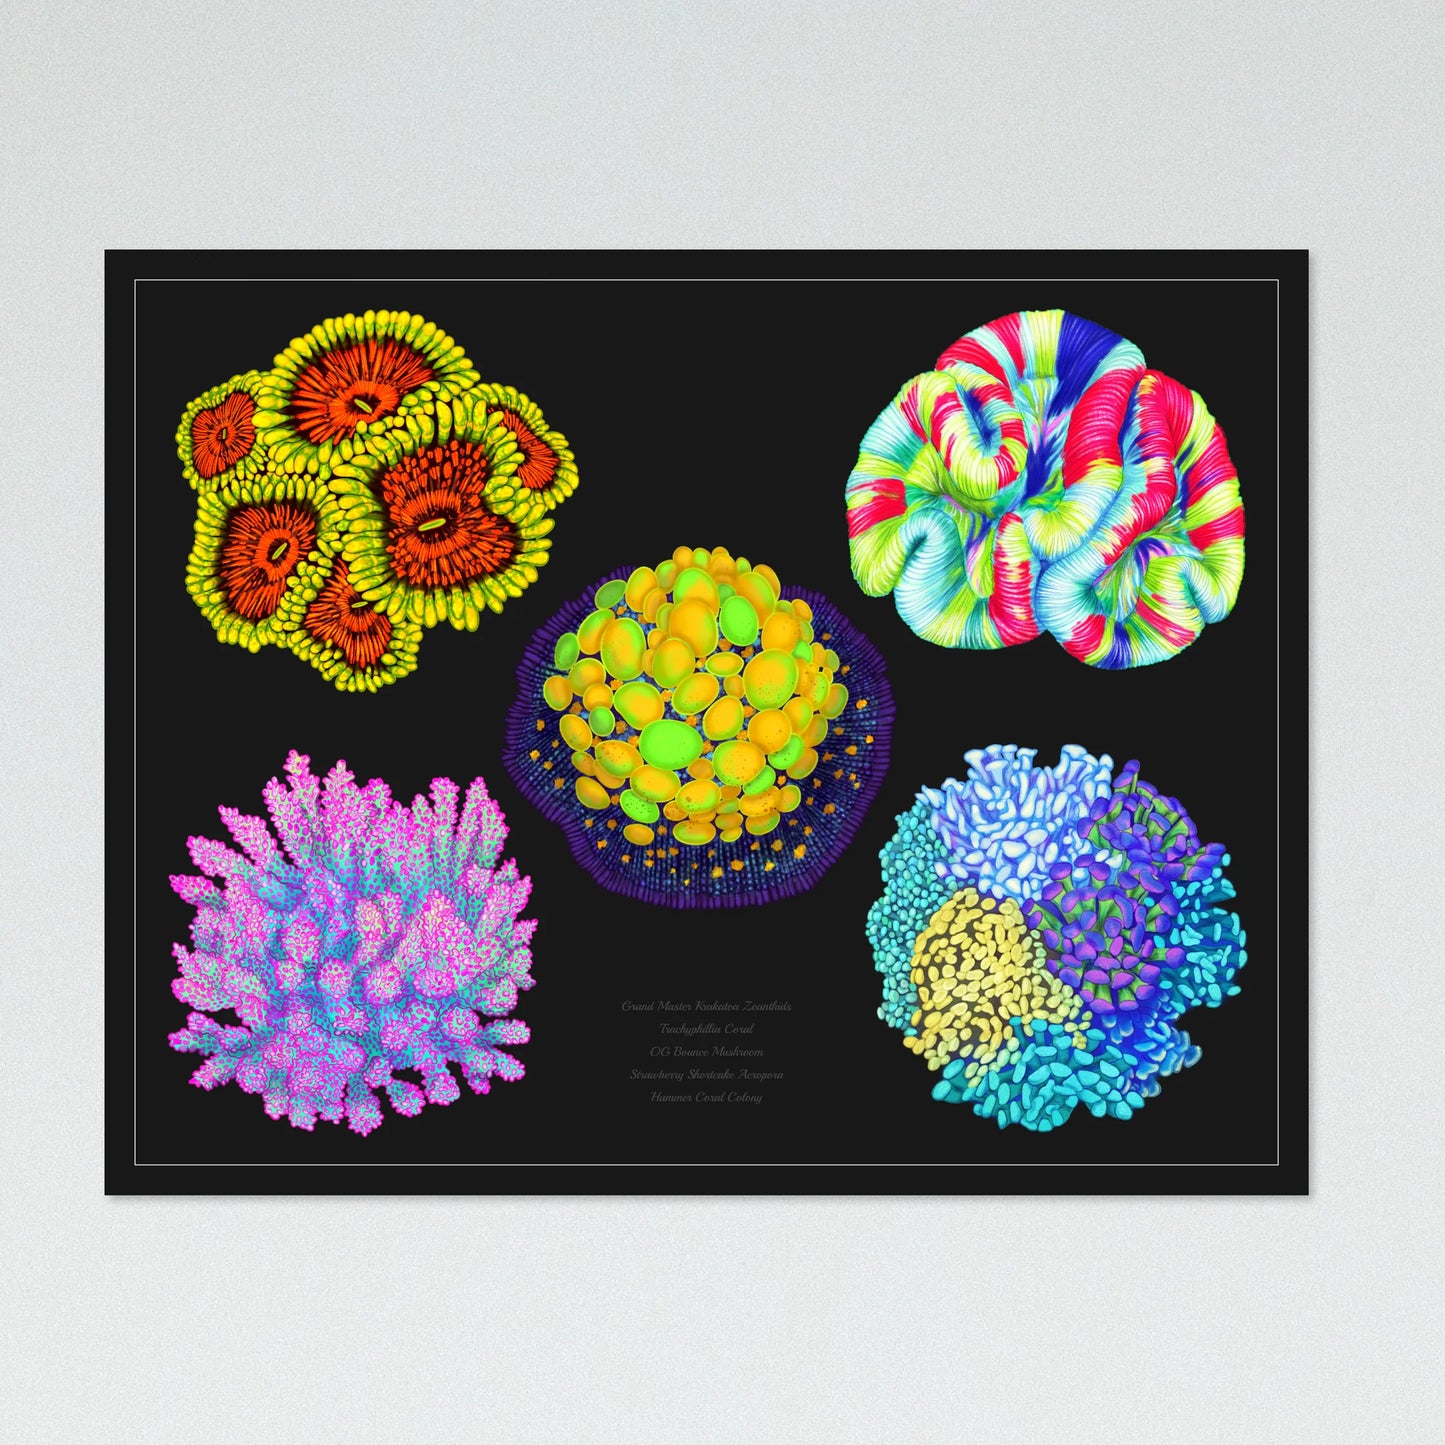 3 Posters Bundle with 15 Corals - Reef of Clowns